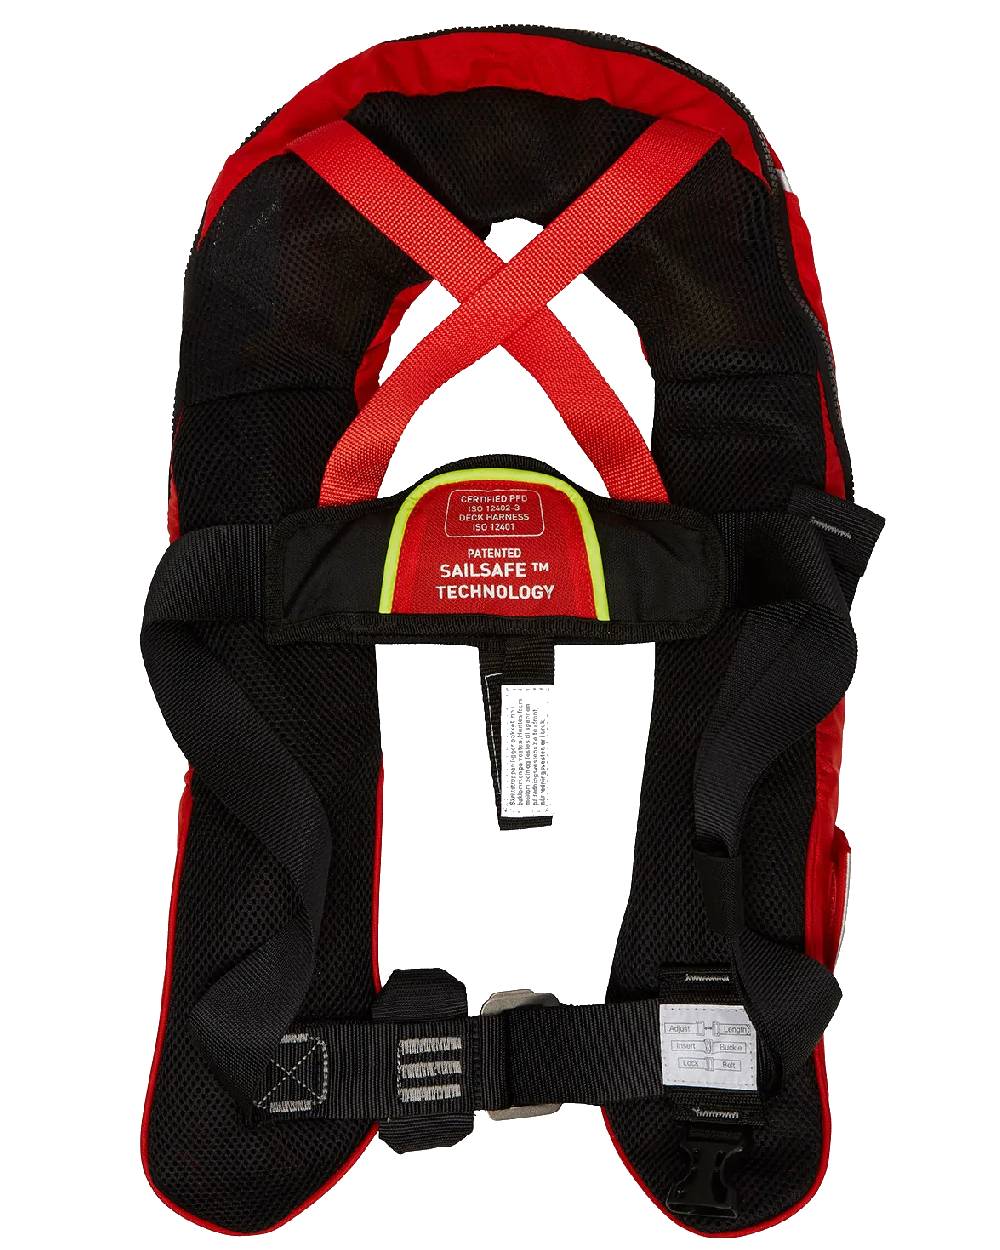 Alert Red coloured Helly Hansen Sailsafe Inflatable Inshore Life Jacket on white background 